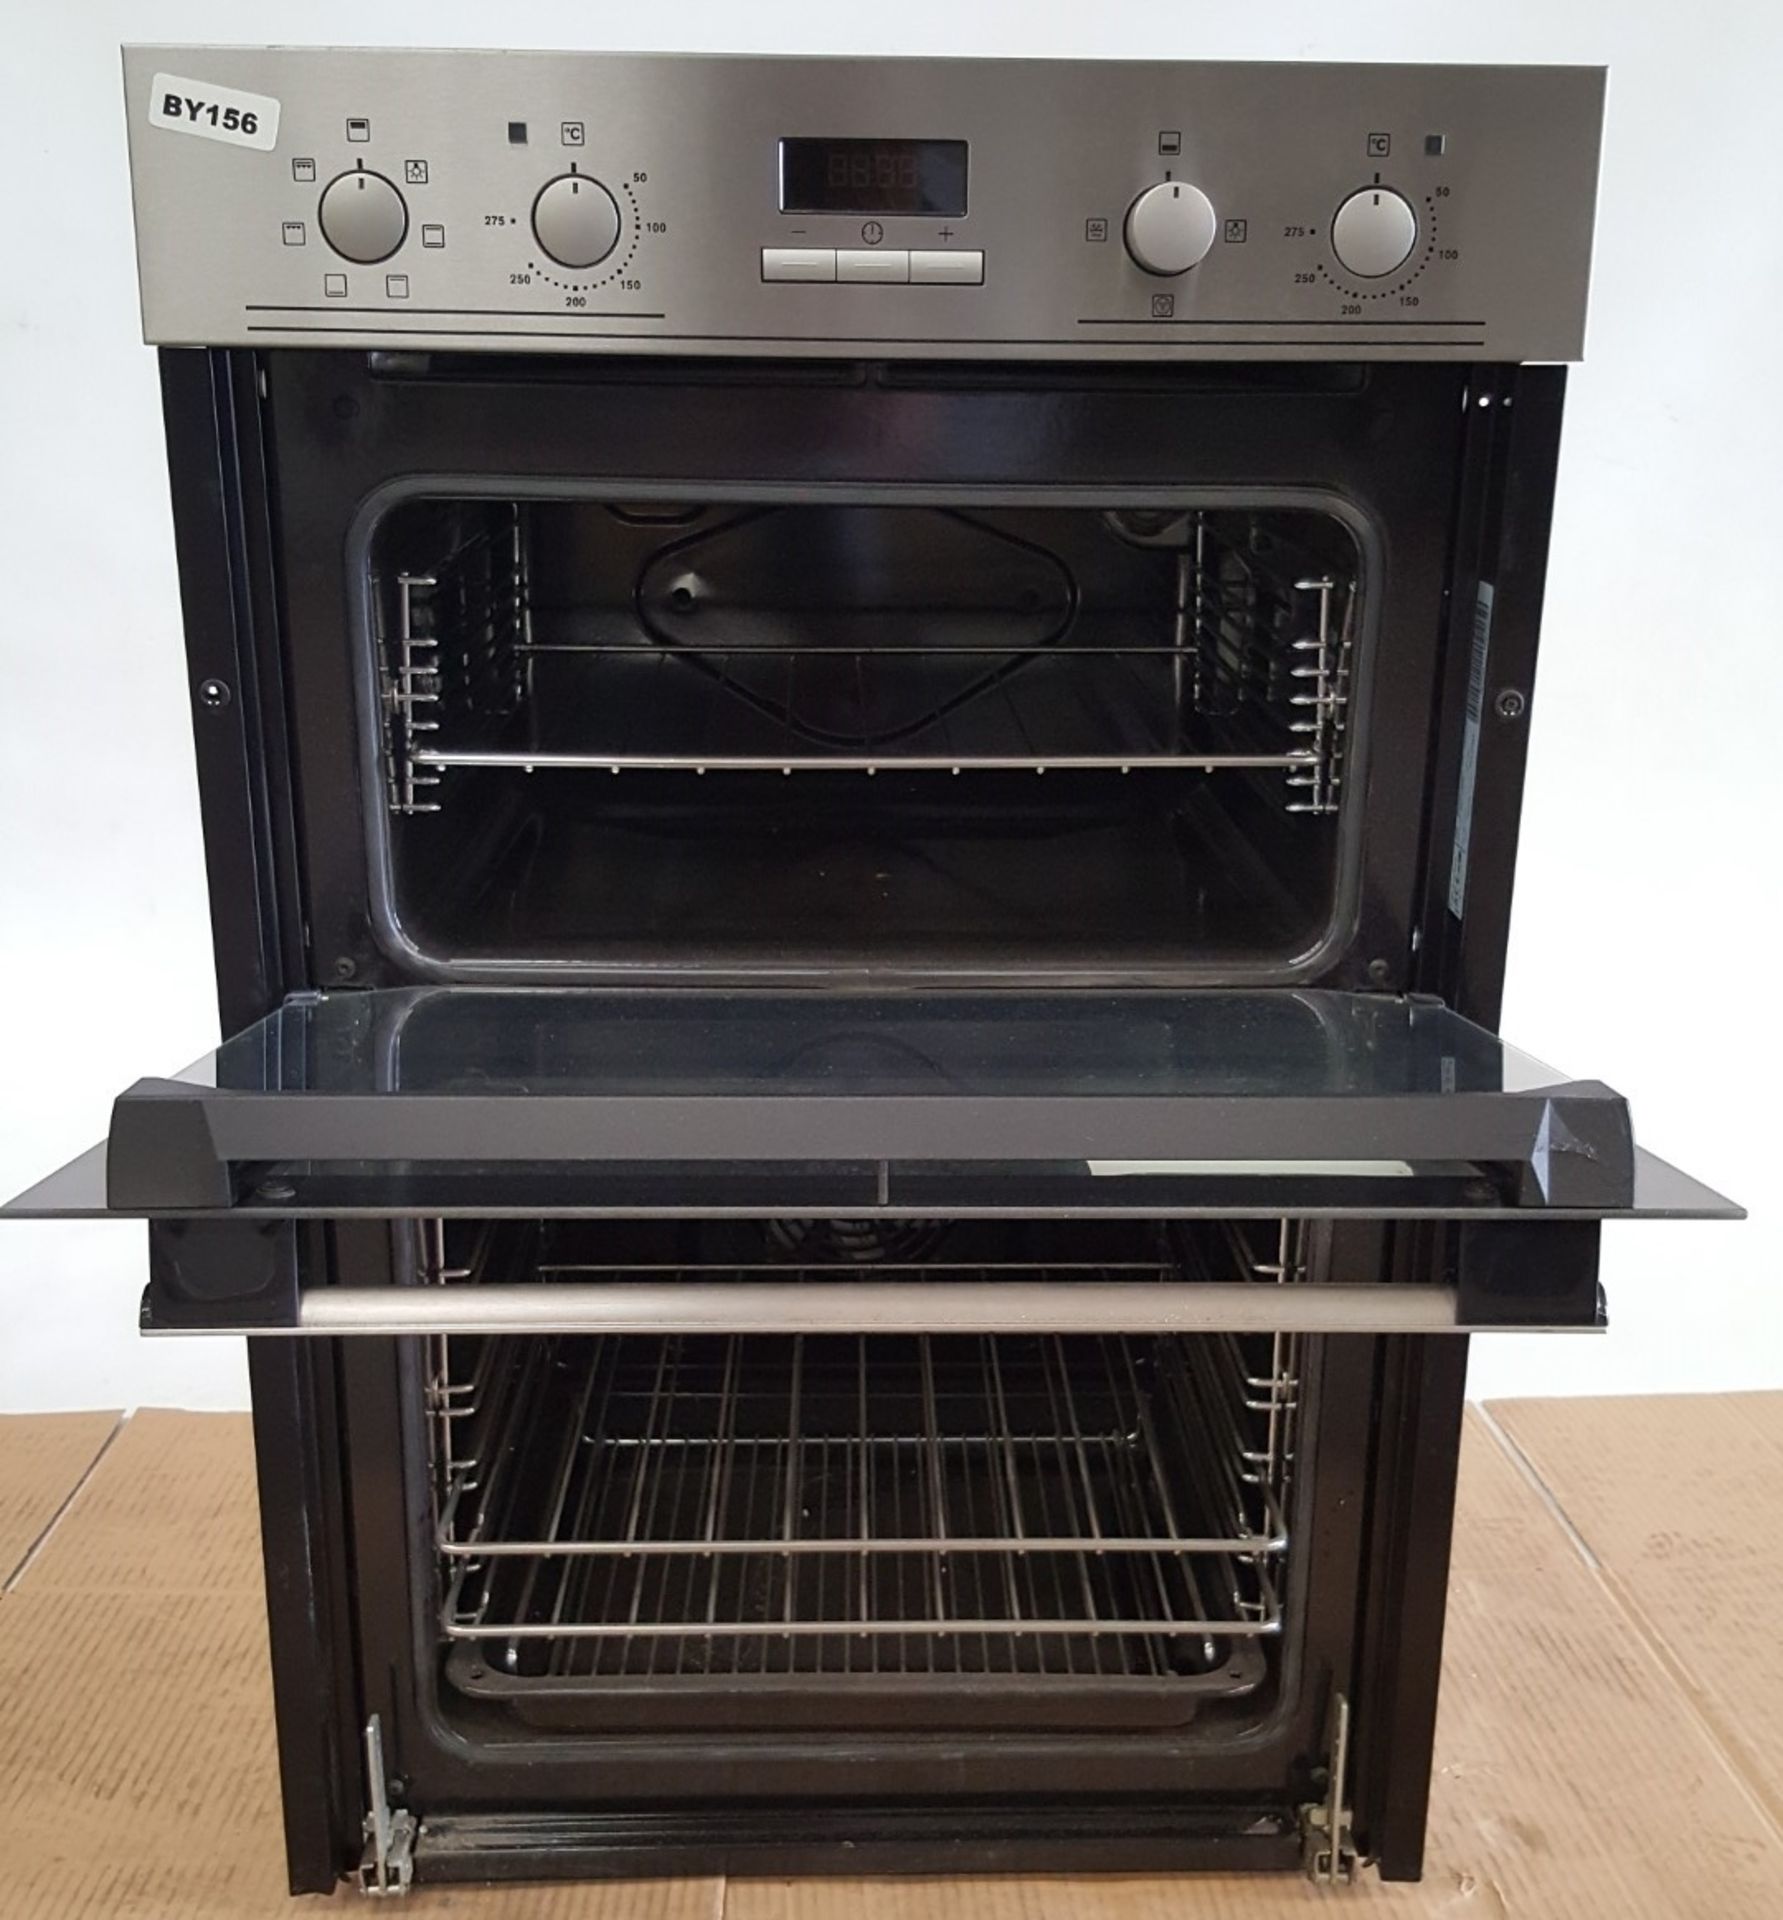 1 x Electrolux EOD3410AOX Built In Double Electric Oven Stainless Steel - Ref BY156 - Image 6 of 6